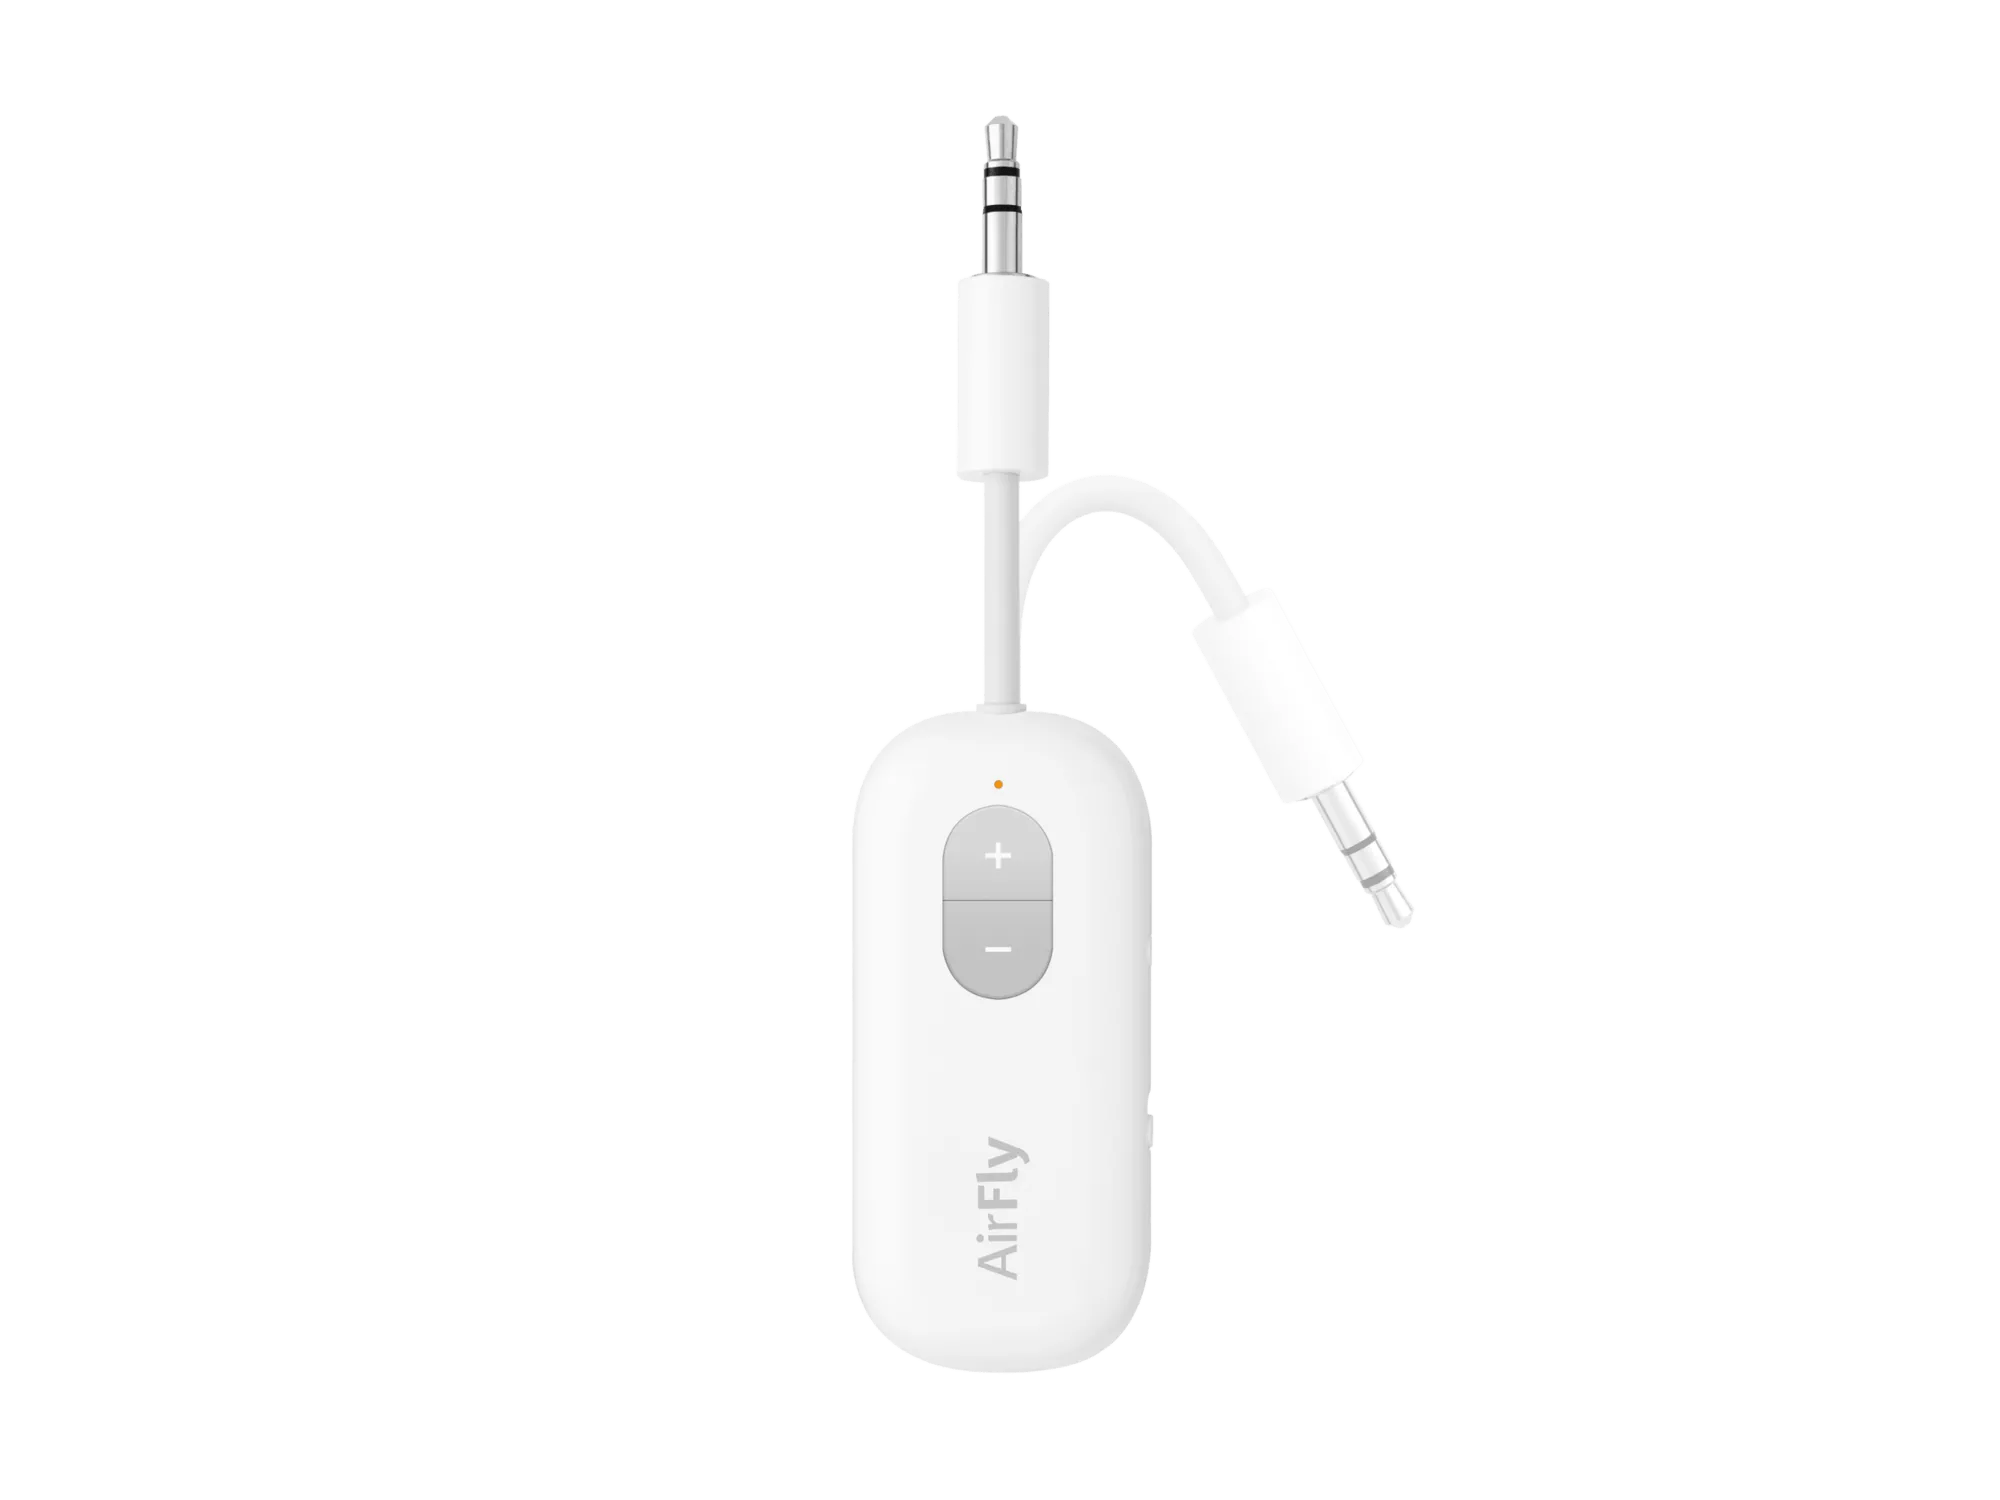 AirFly SE – Aux Bluetooth Transmitter